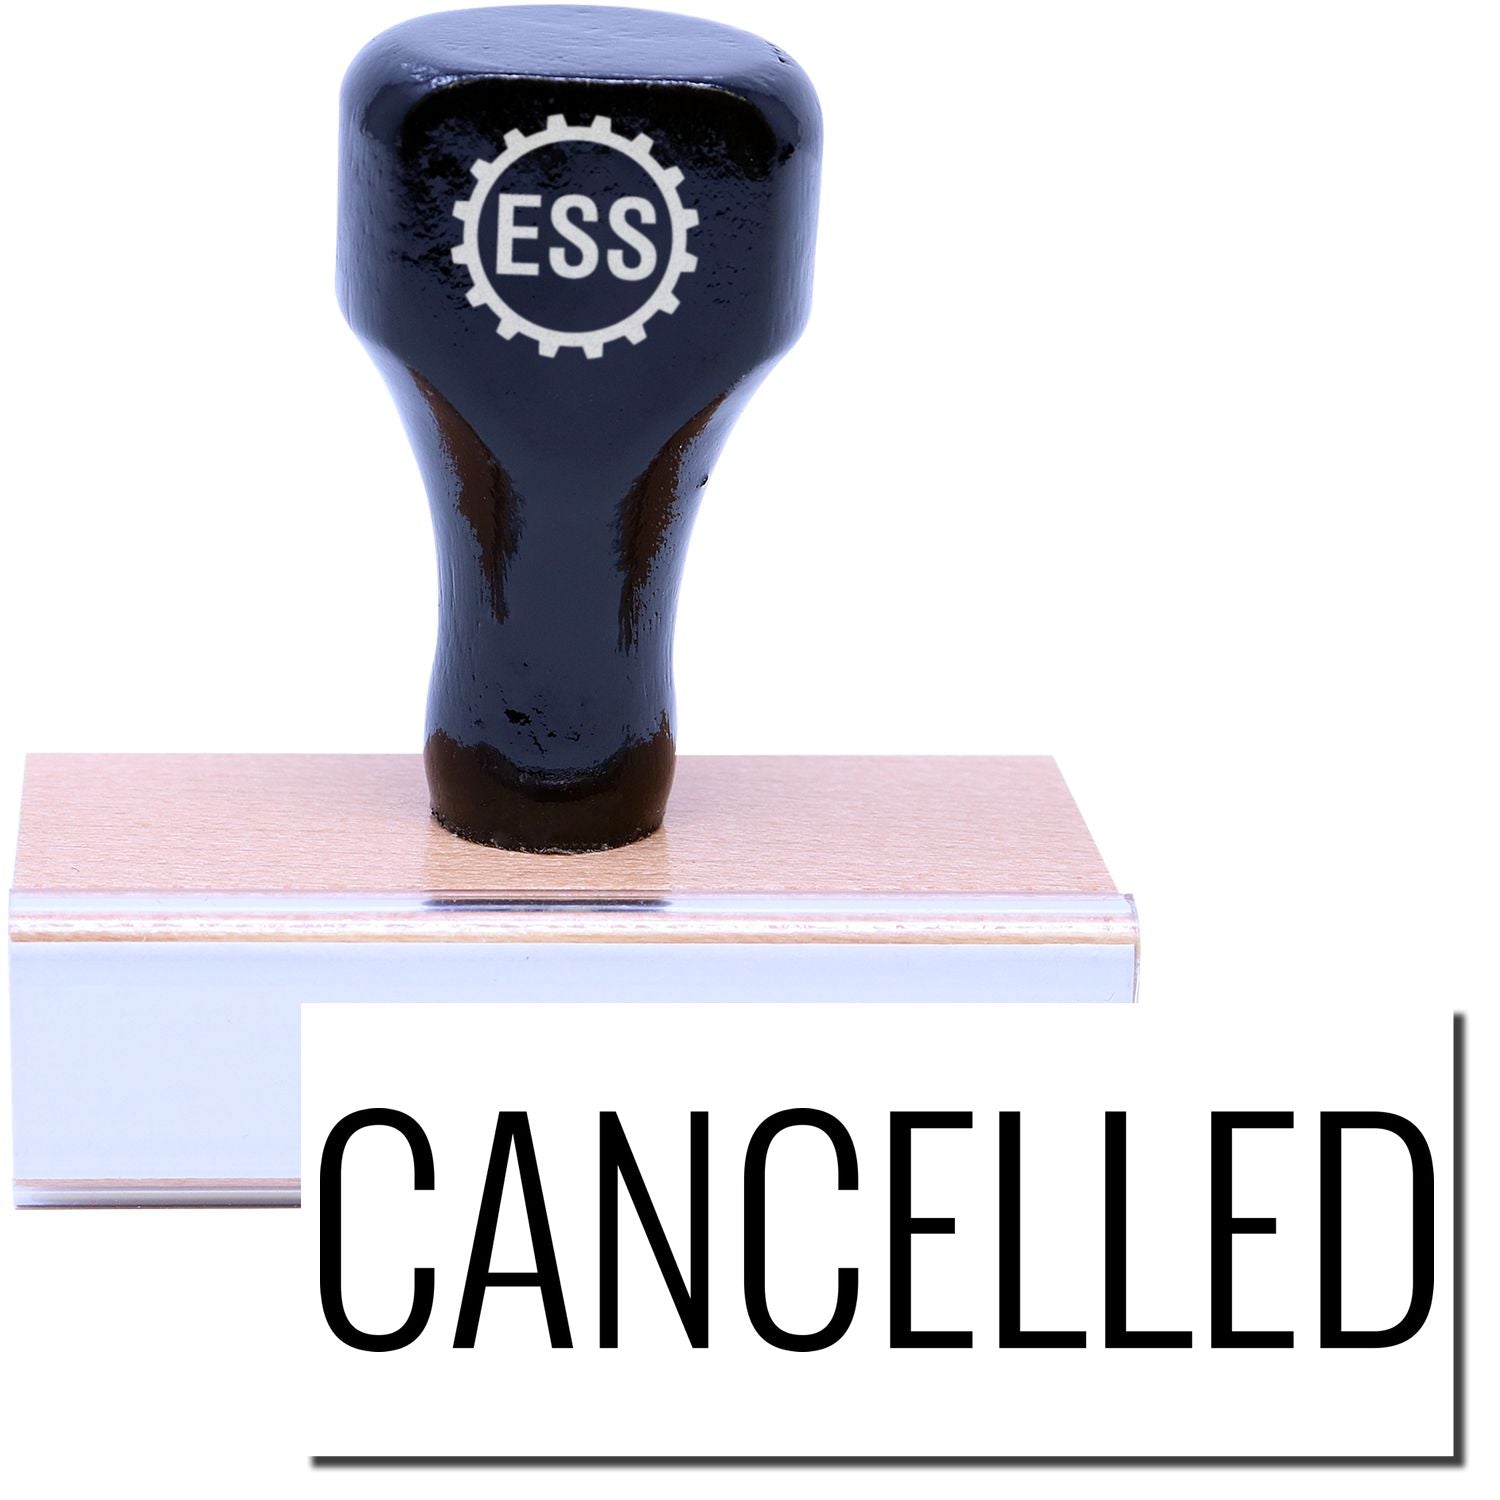 A stock office rubber stamp with a stamped image showing how the text "CANCELLED" in a narrow font is displayed after stamping.